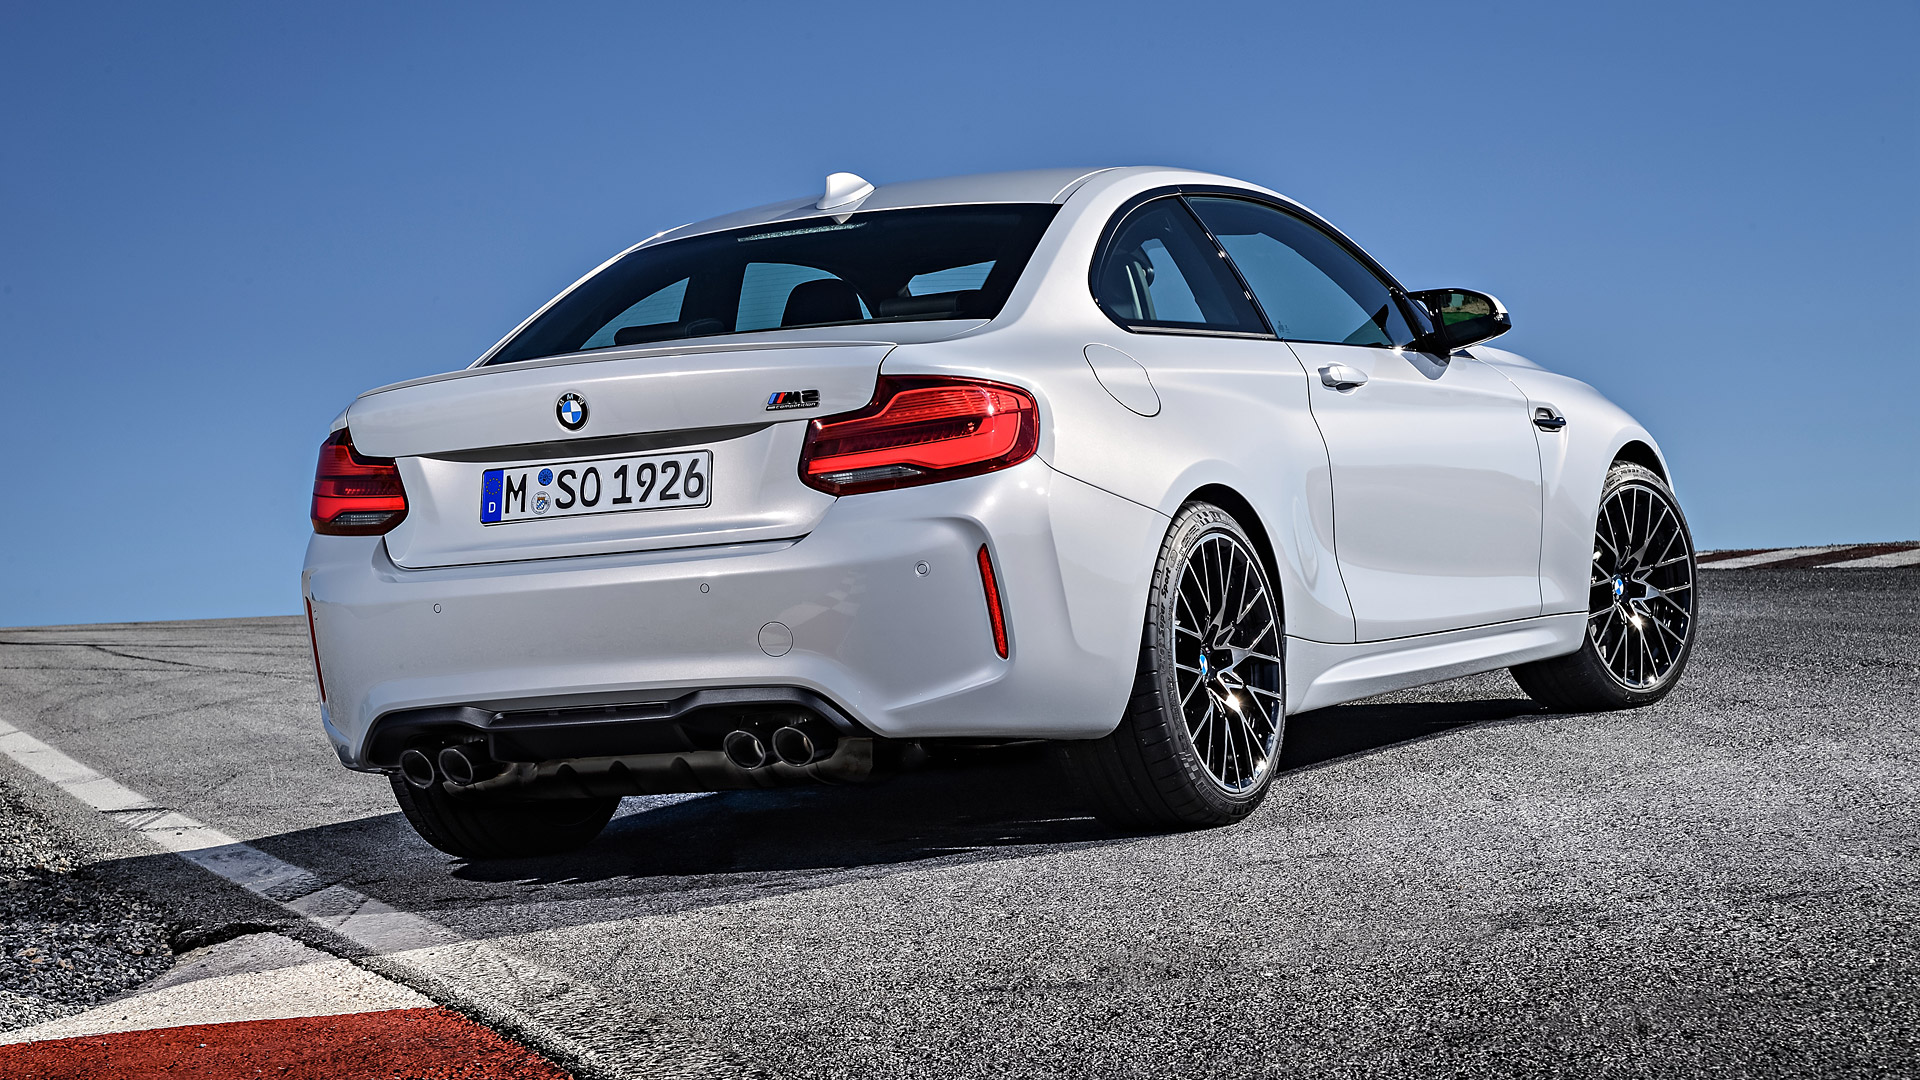  2019 BMW M2 Competition Wallpaper.